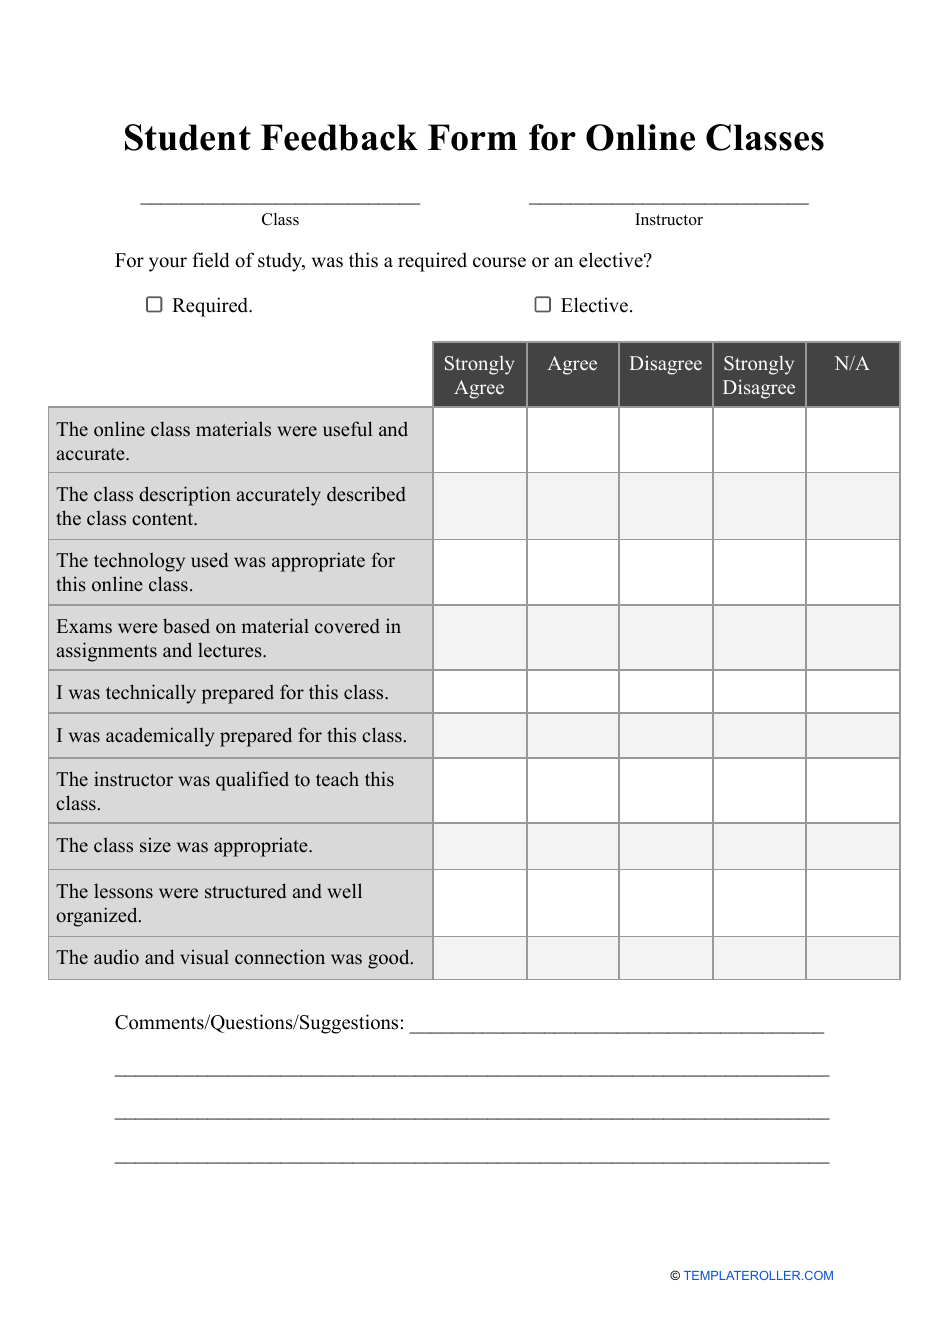 Student Feedback Form for Online Classes, Page 1